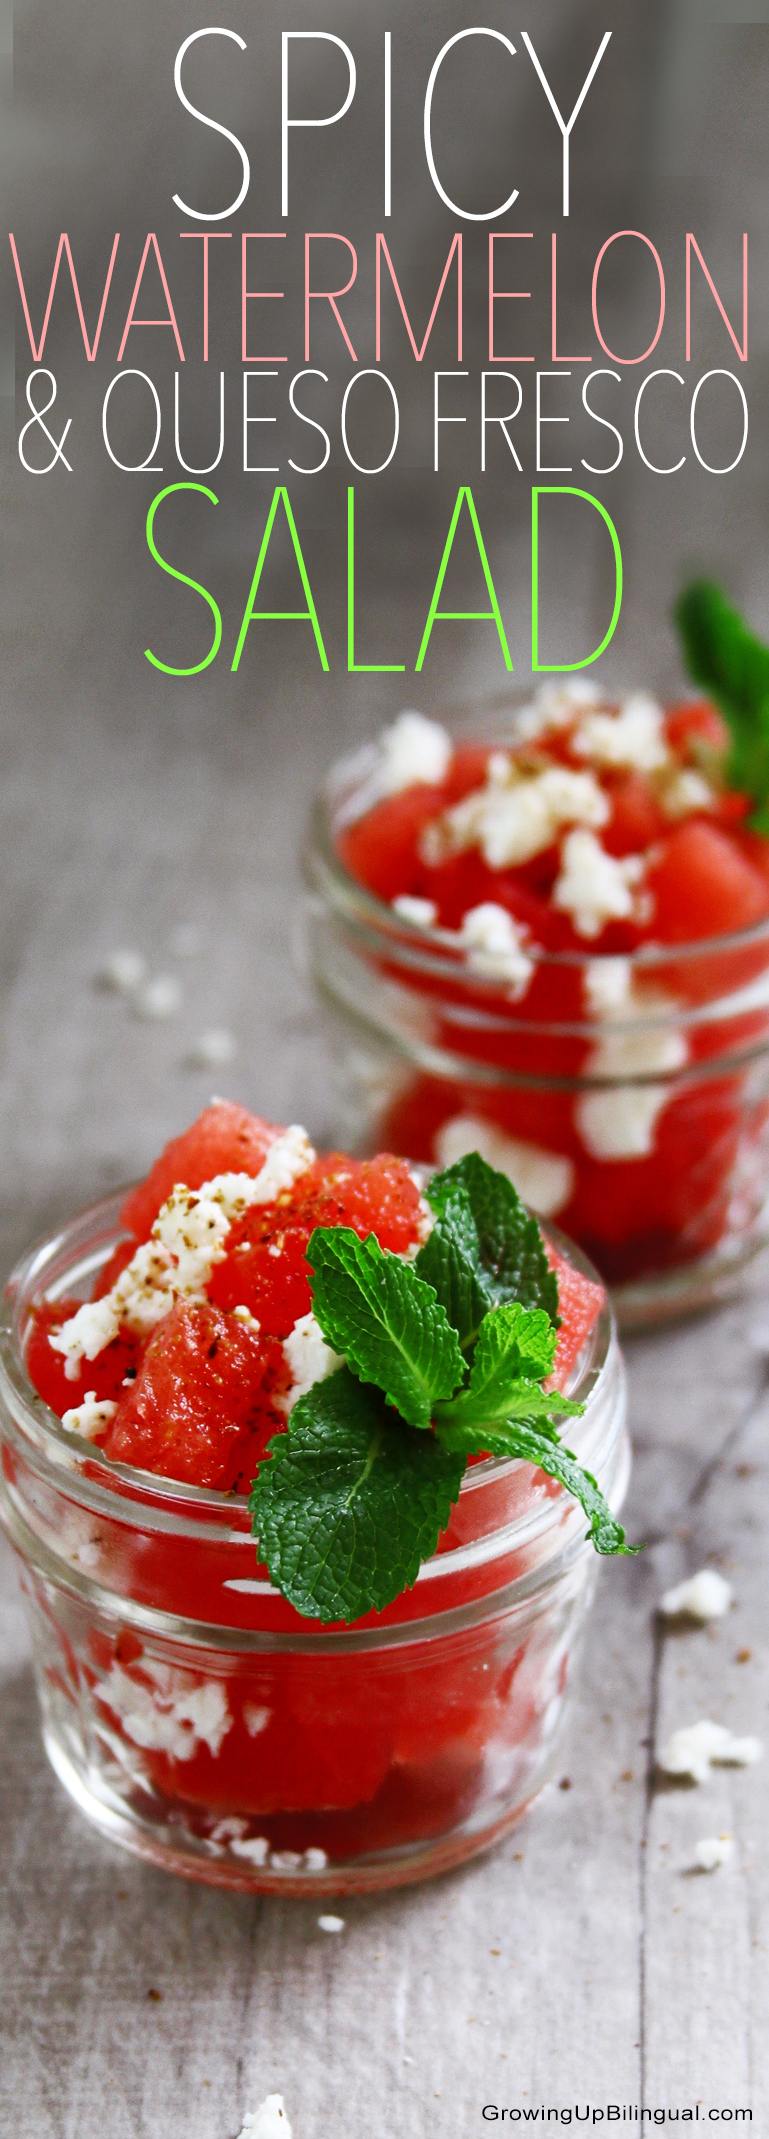 spicy watermelon and queso fresco salad 